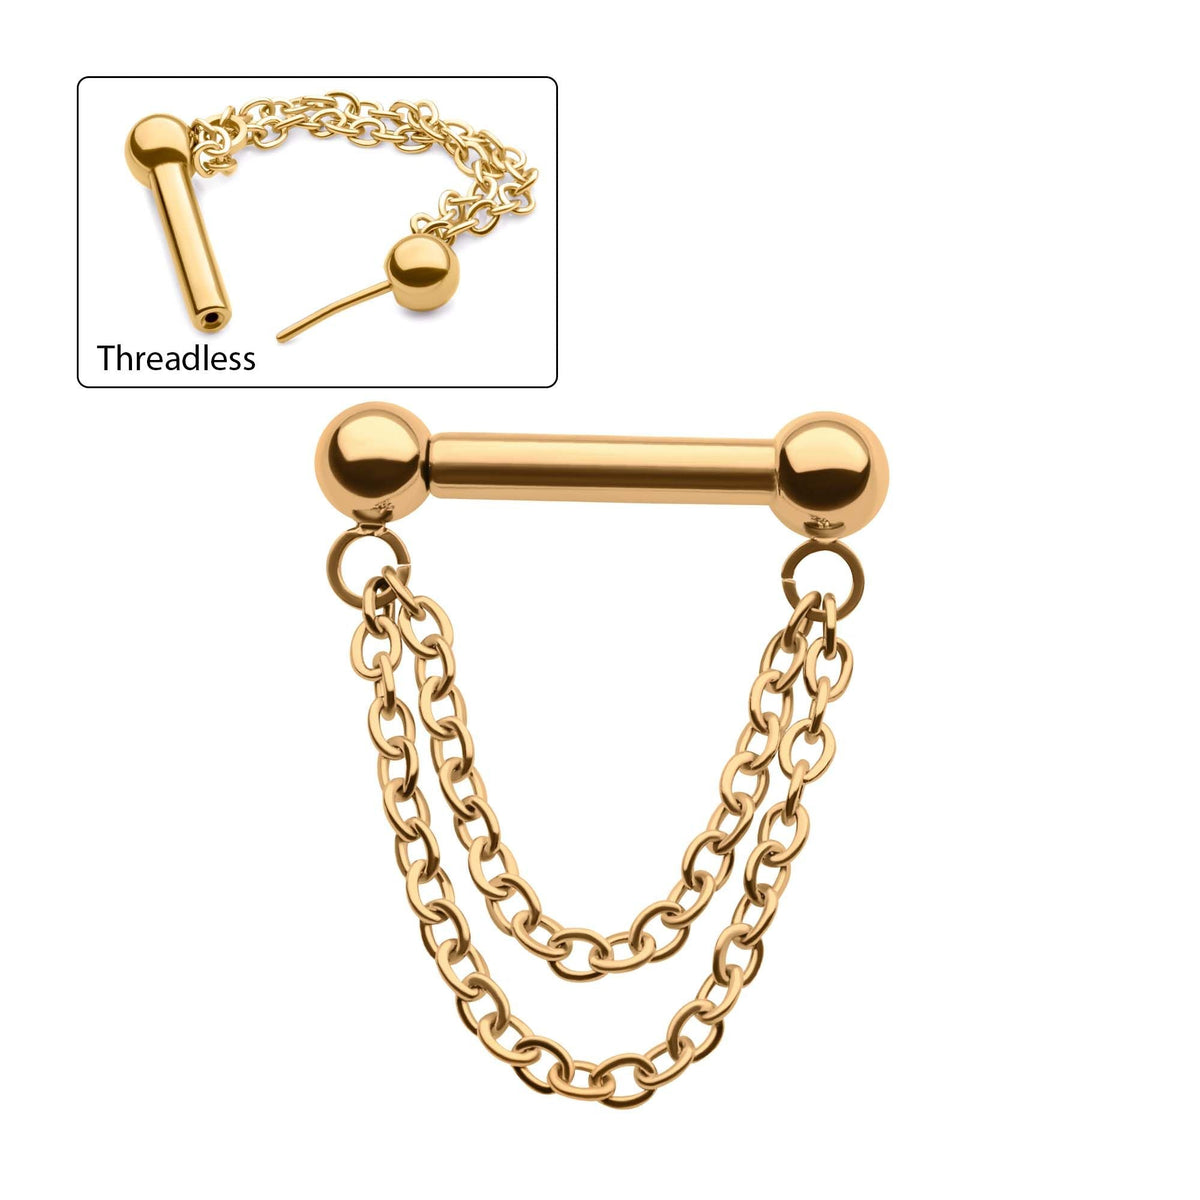 24Kt Gold PVD Titanium One Side Threadless, One Side Fixed Septum Bar Balls Two Gold Plated Chains tip24ksep61c2 -Rebel Bod-RebelBod